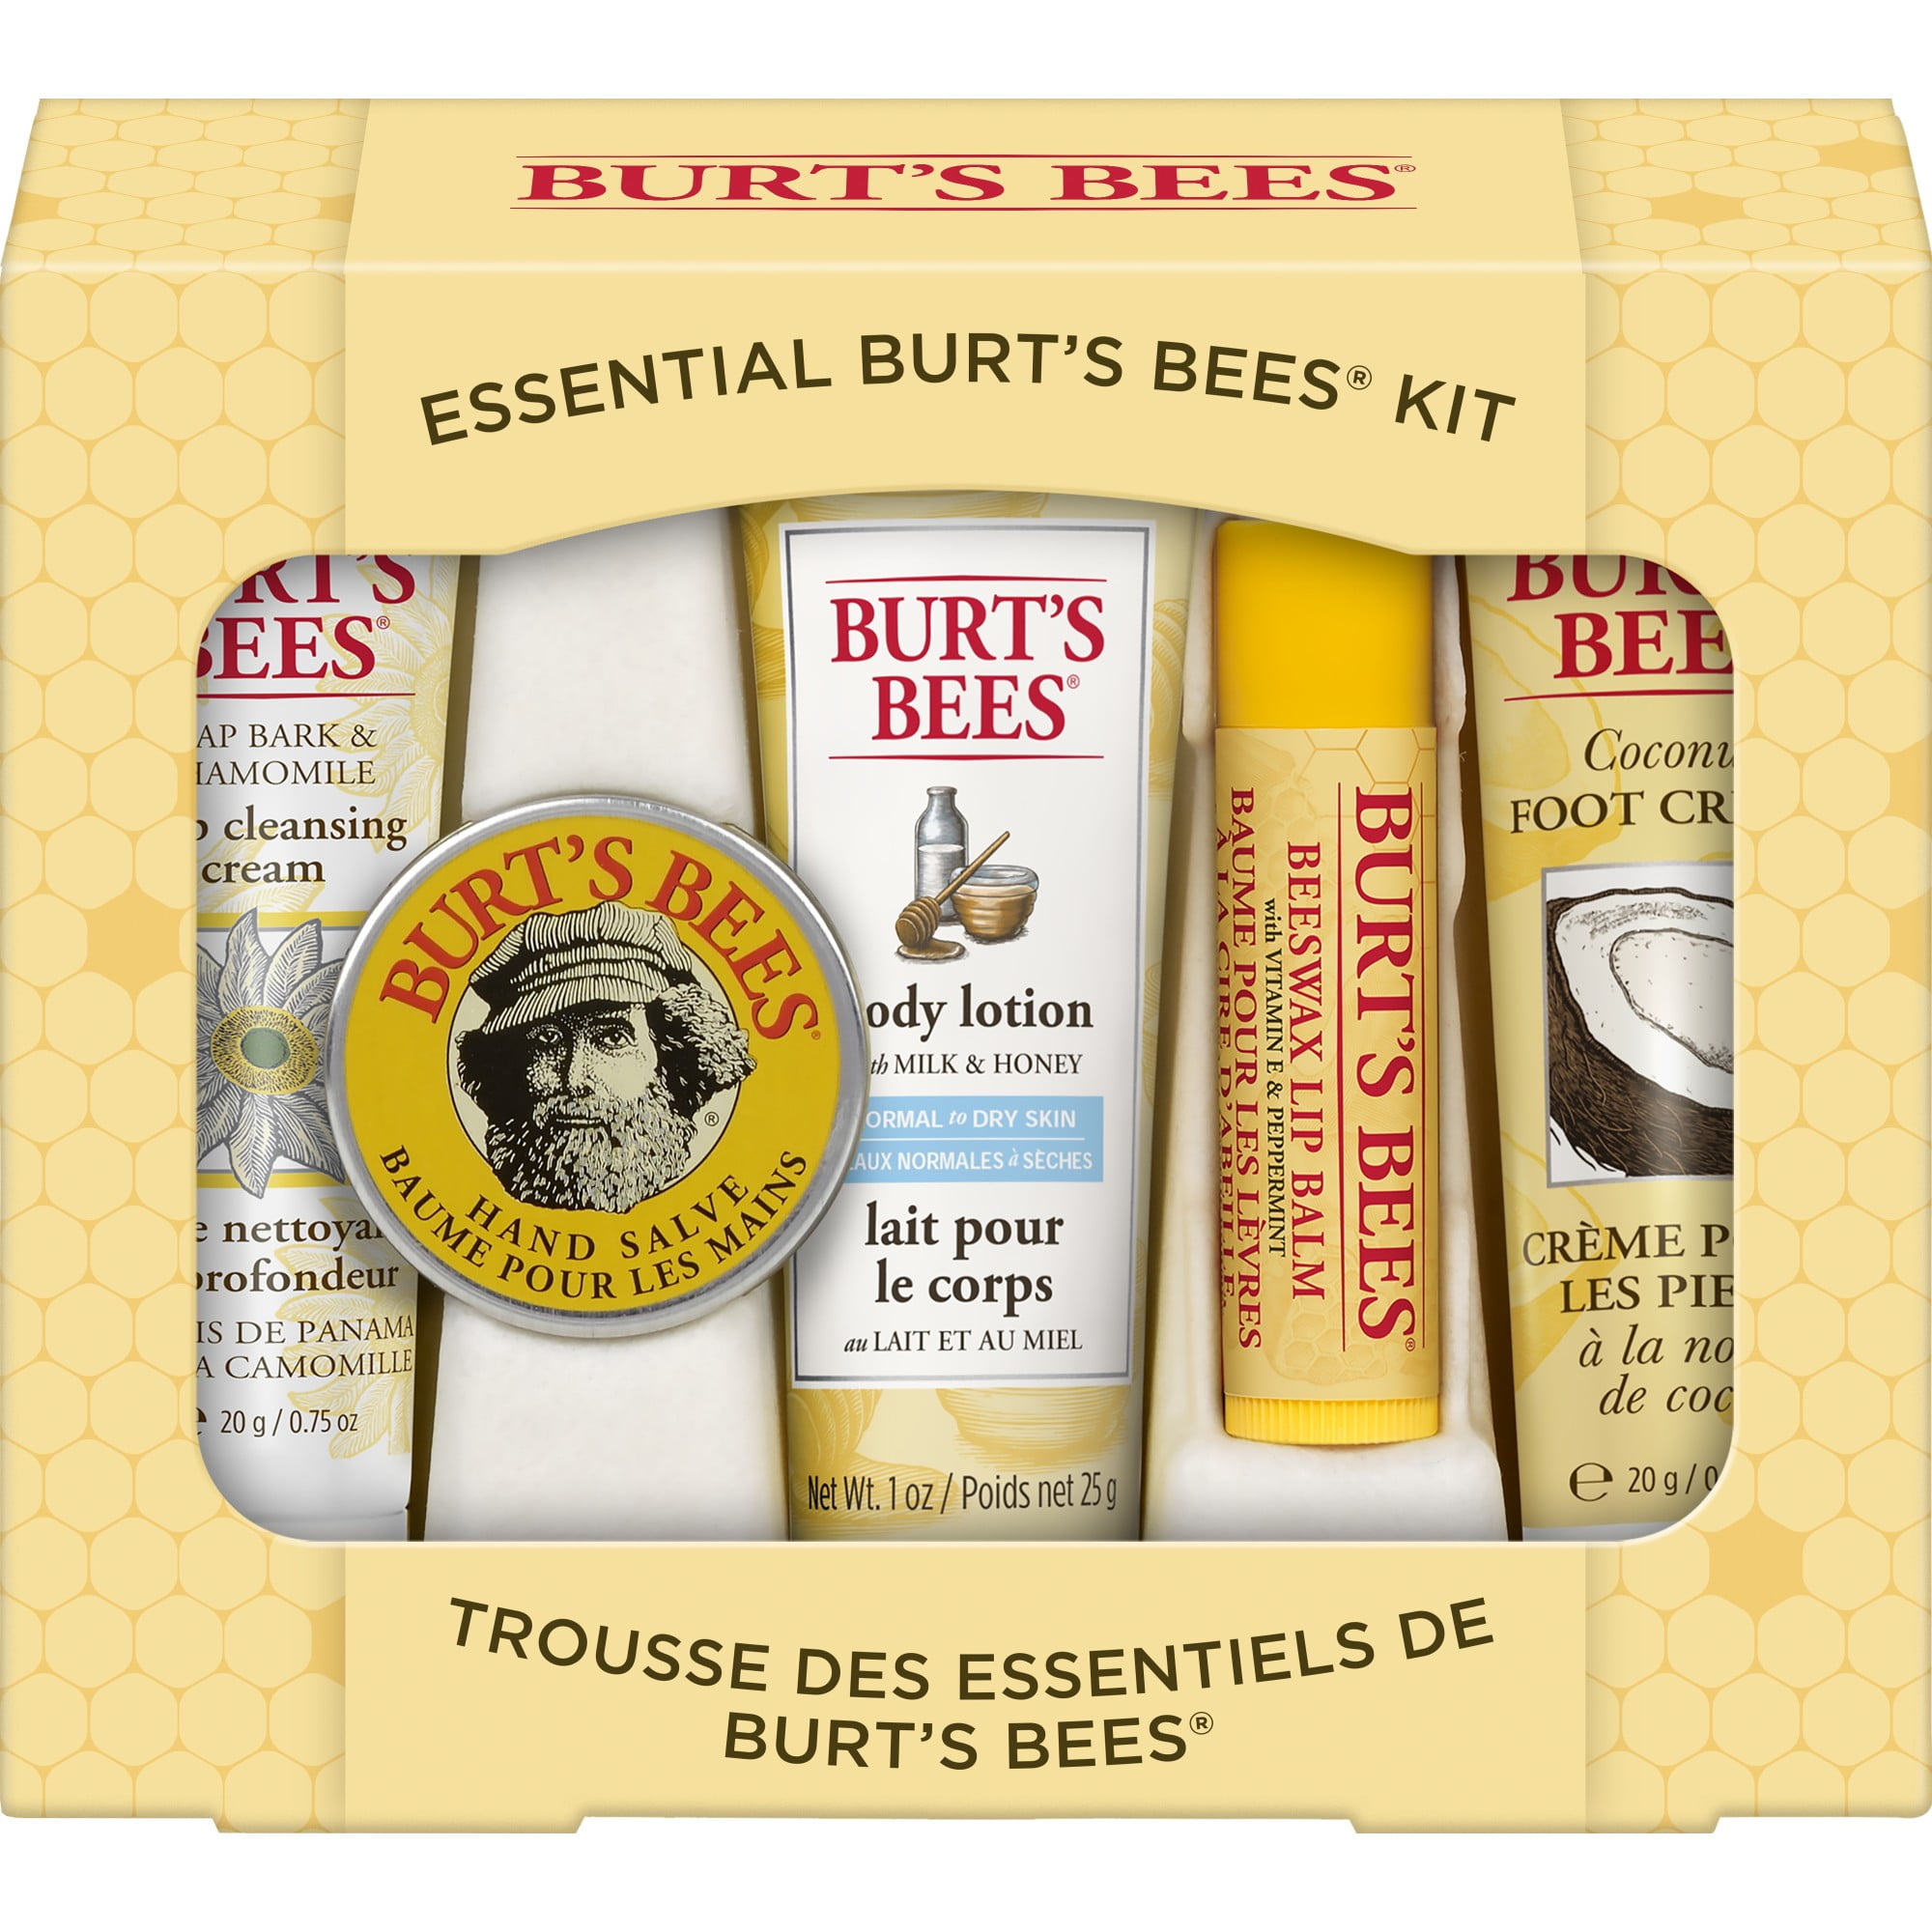 Burt's Bees Essential Gift Set - Cleansing Cream, Hand Salve, Body Lotion, Foot Cream and Lip Balm